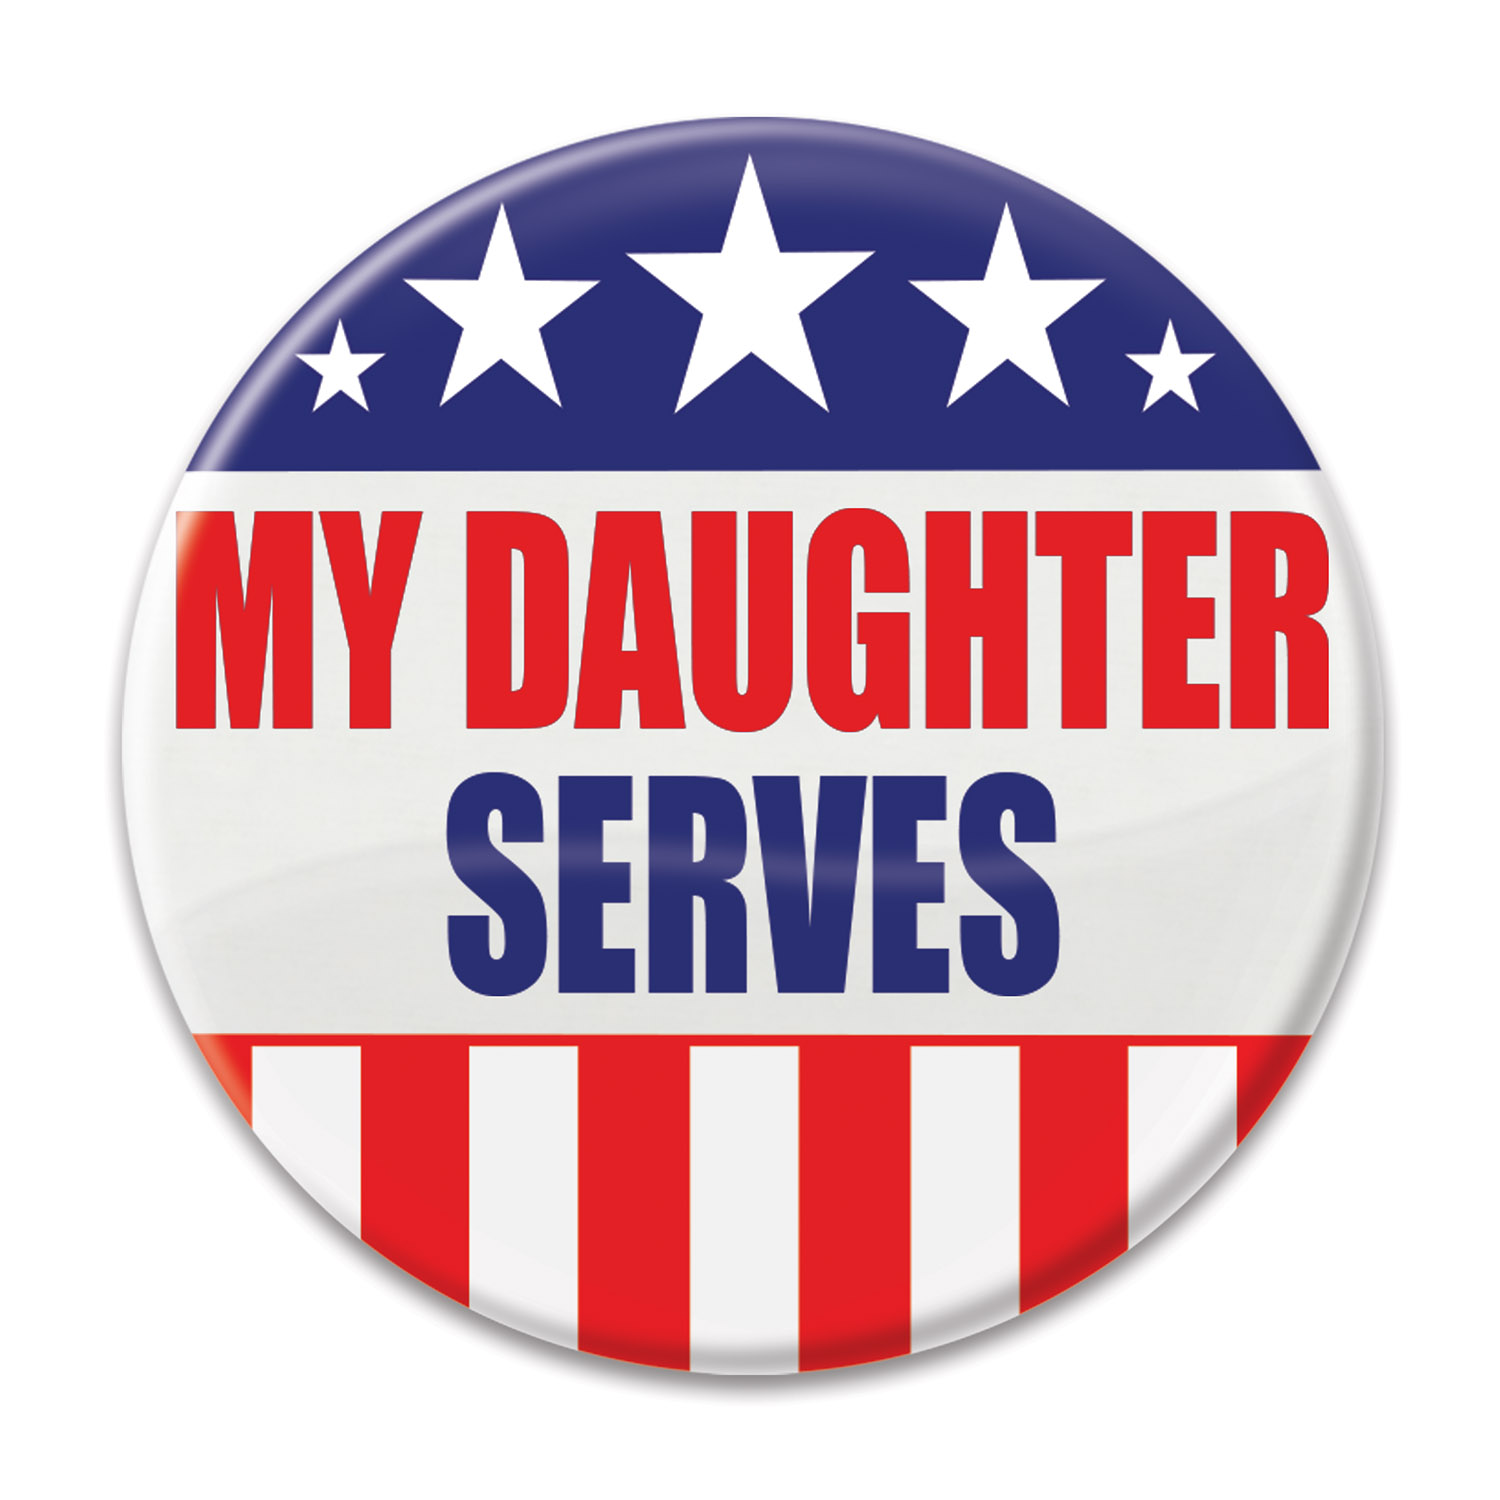 MY DAUGHTER SERVES BUTTON (6) image